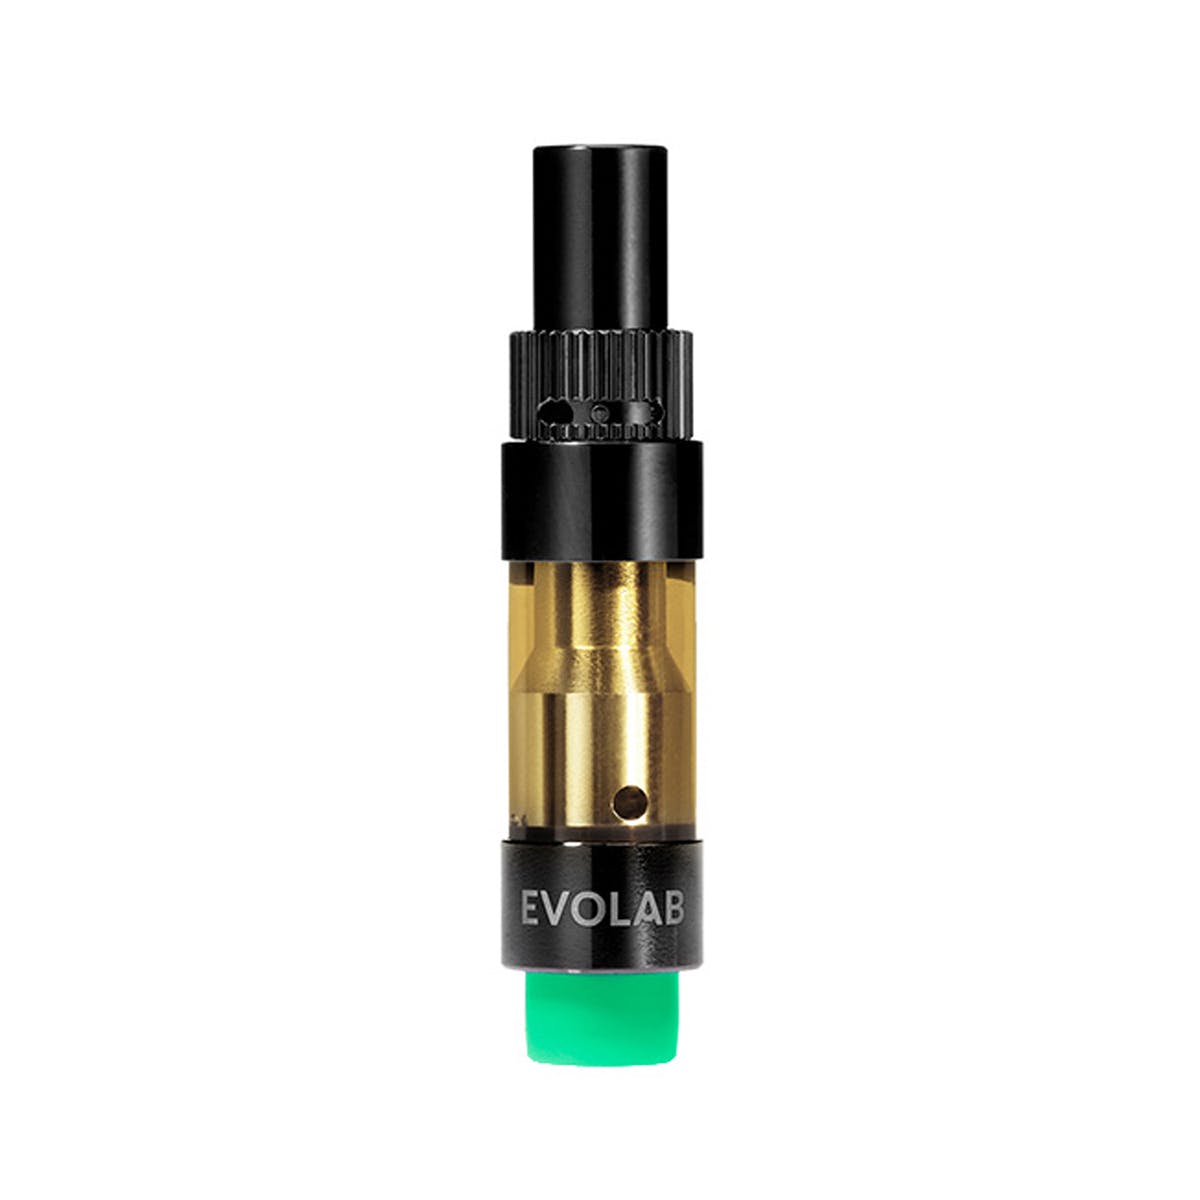 concentrate-evolab-colors-sweet-melon-500mg-cartridge